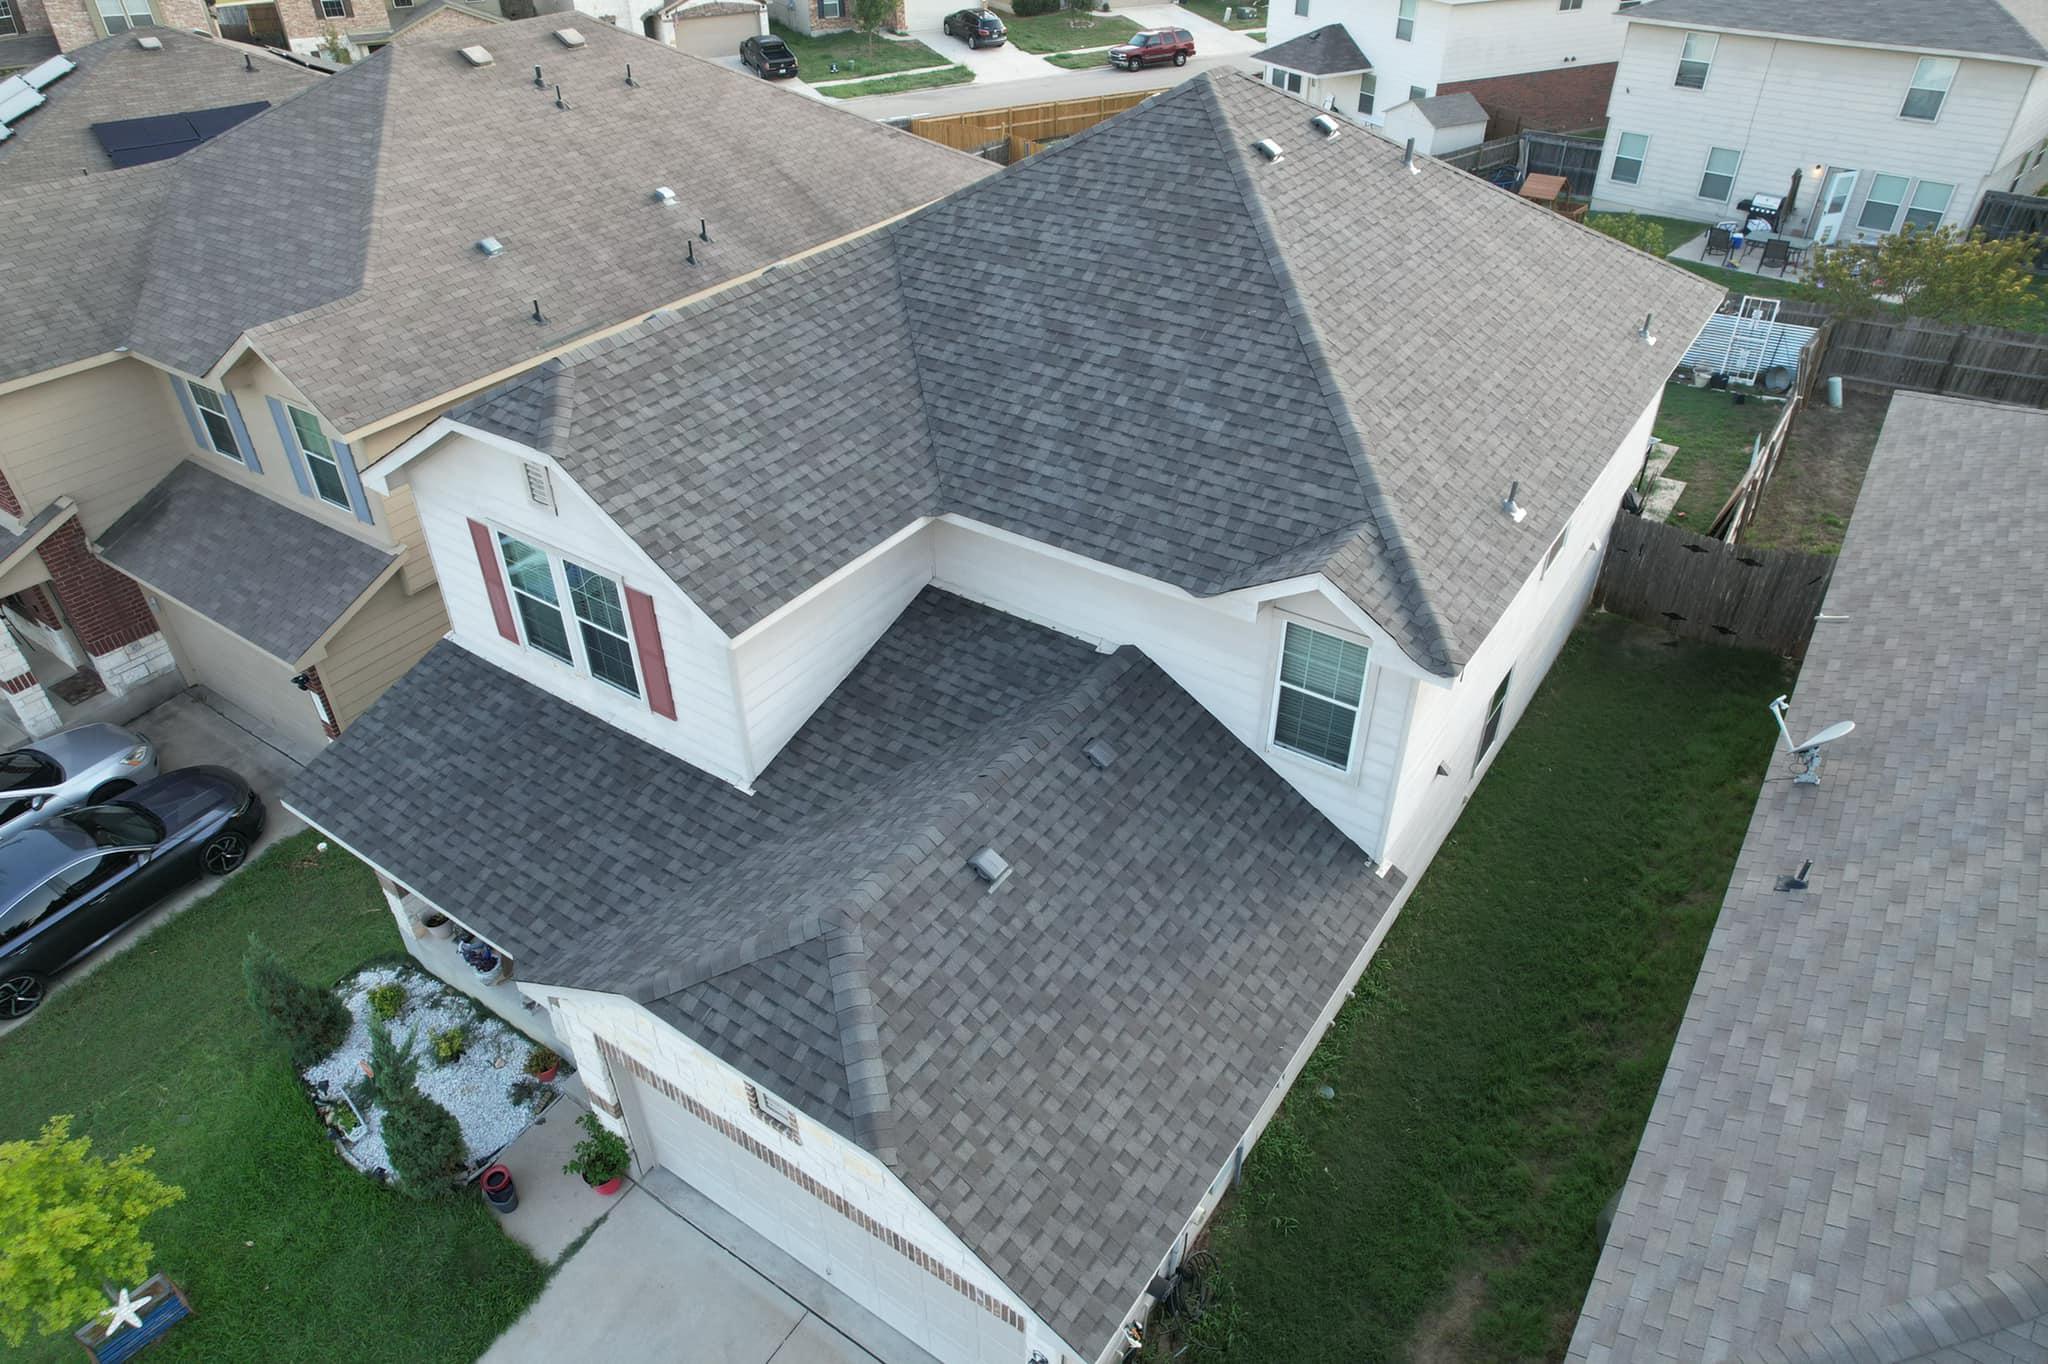 Get rid of your leaky roof! Call our roofers!